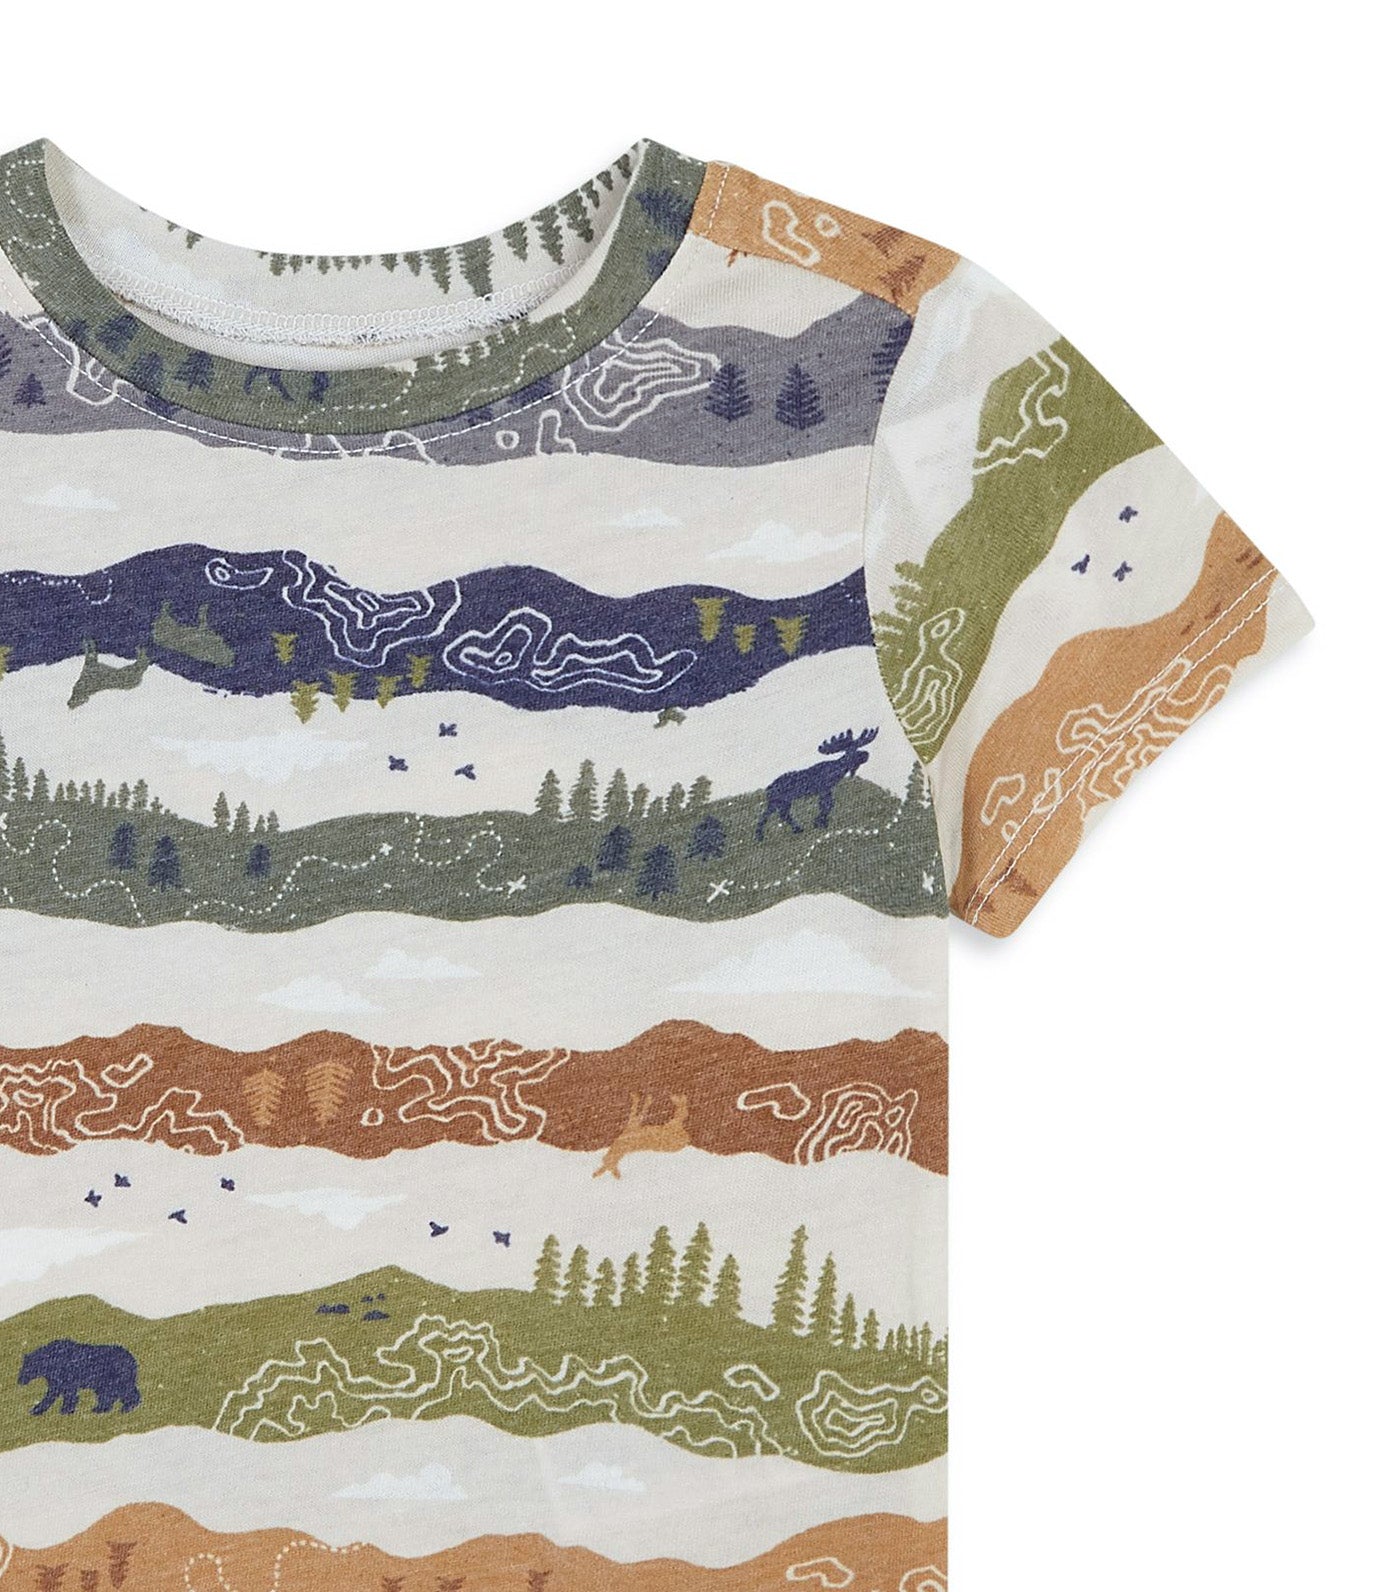 Unisex Printed T-Shirt for Toddler - Brown Scenic Top